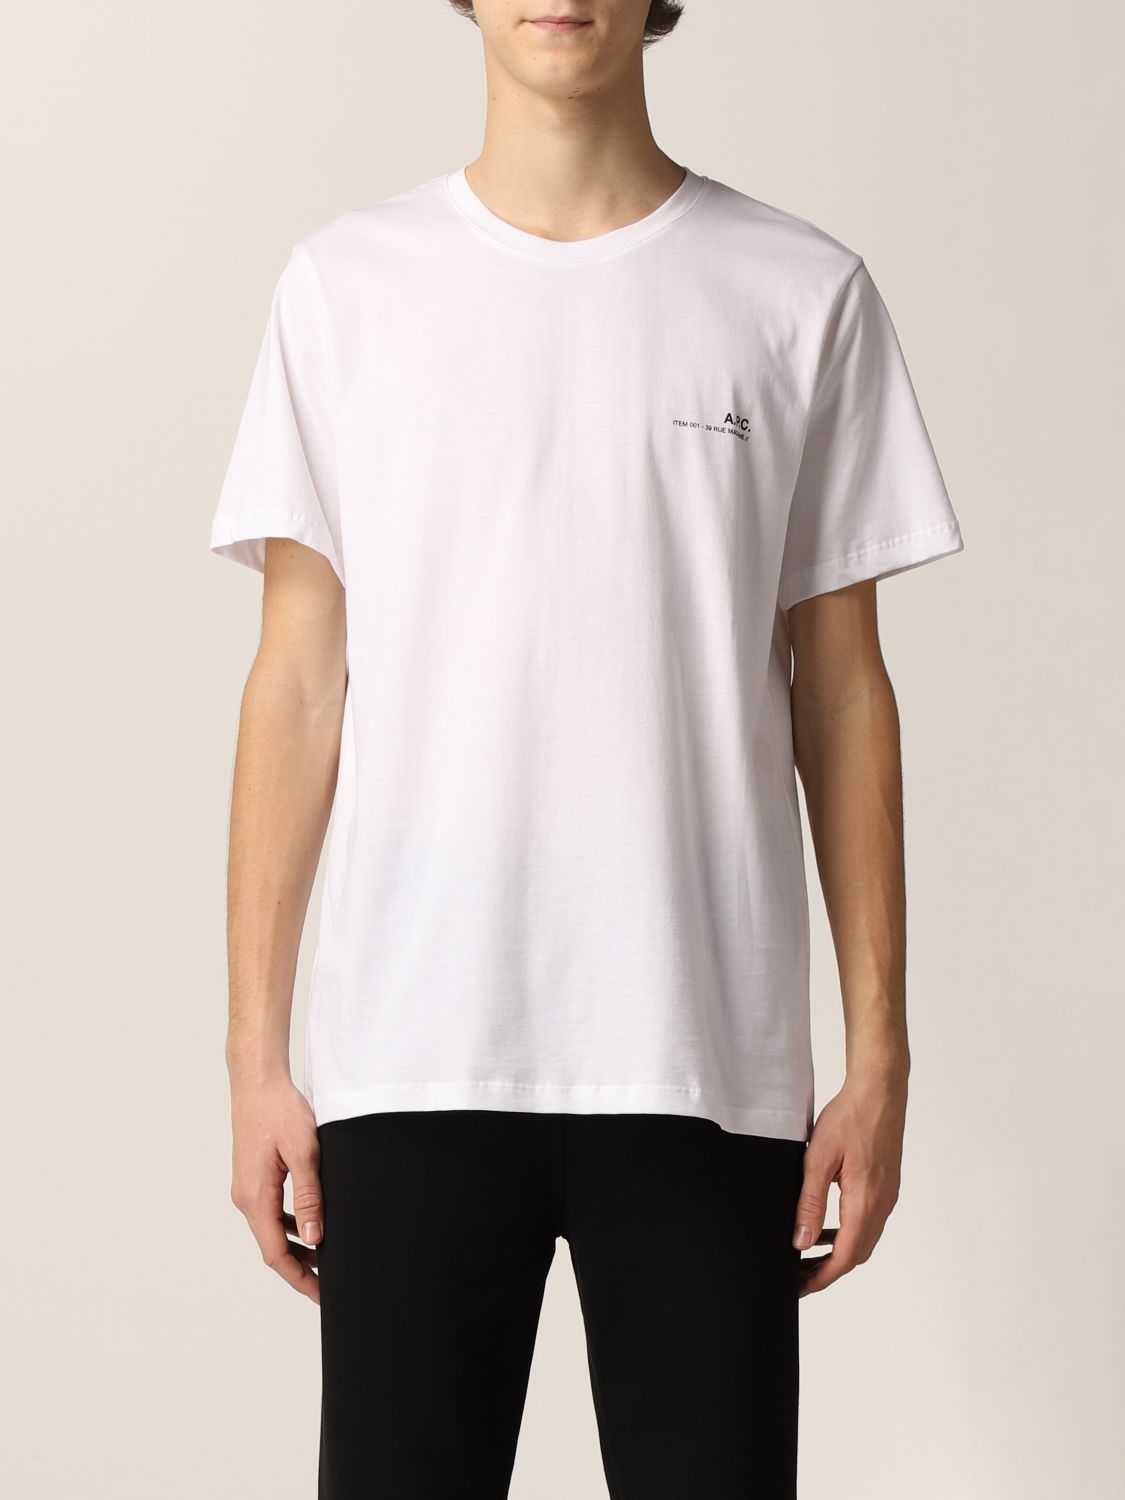 A.P.C Downtown Los Angeles-Blanc Homme Tee T Shirt NEW 